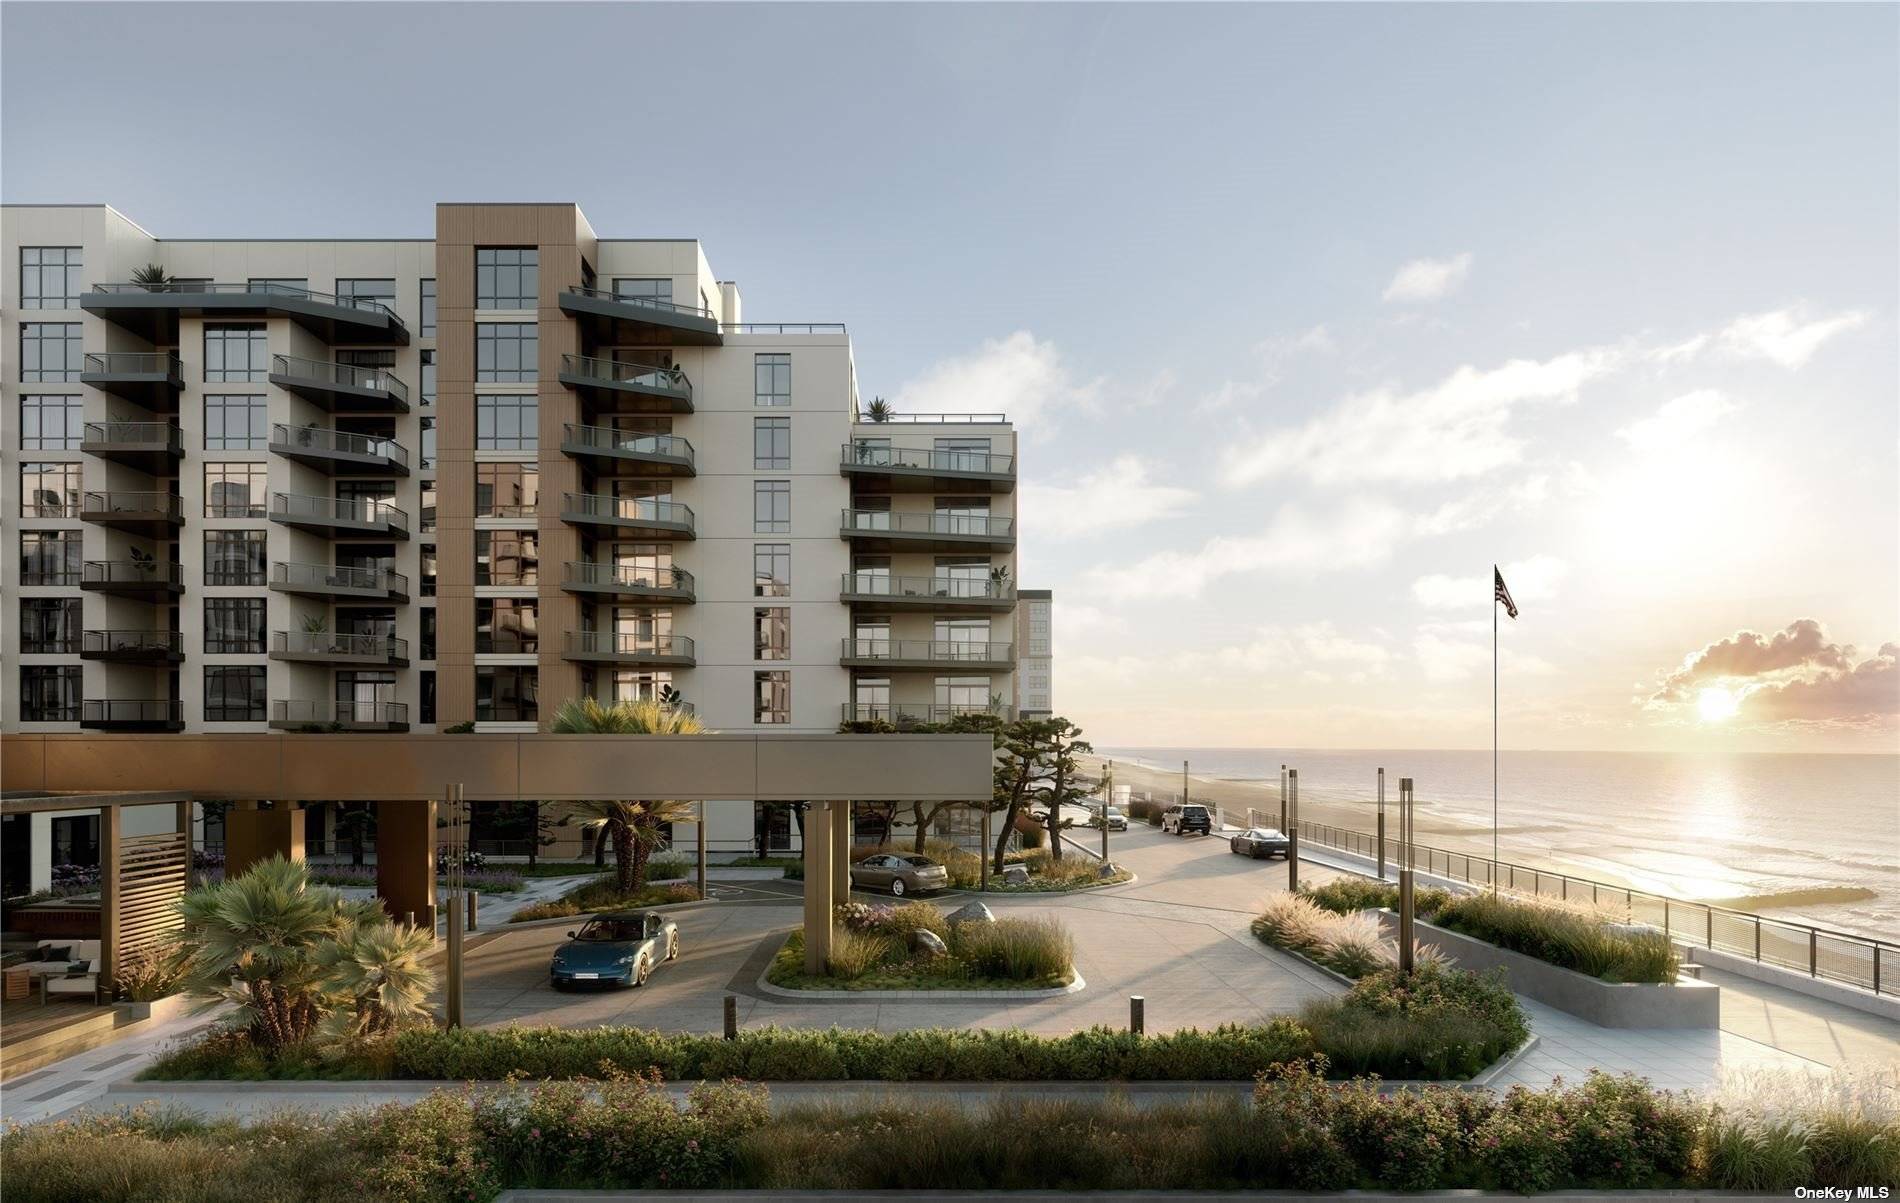 A luxury beach hotel inspired condominium, The Boardwalk is a first of its kind offering in Long Beach.